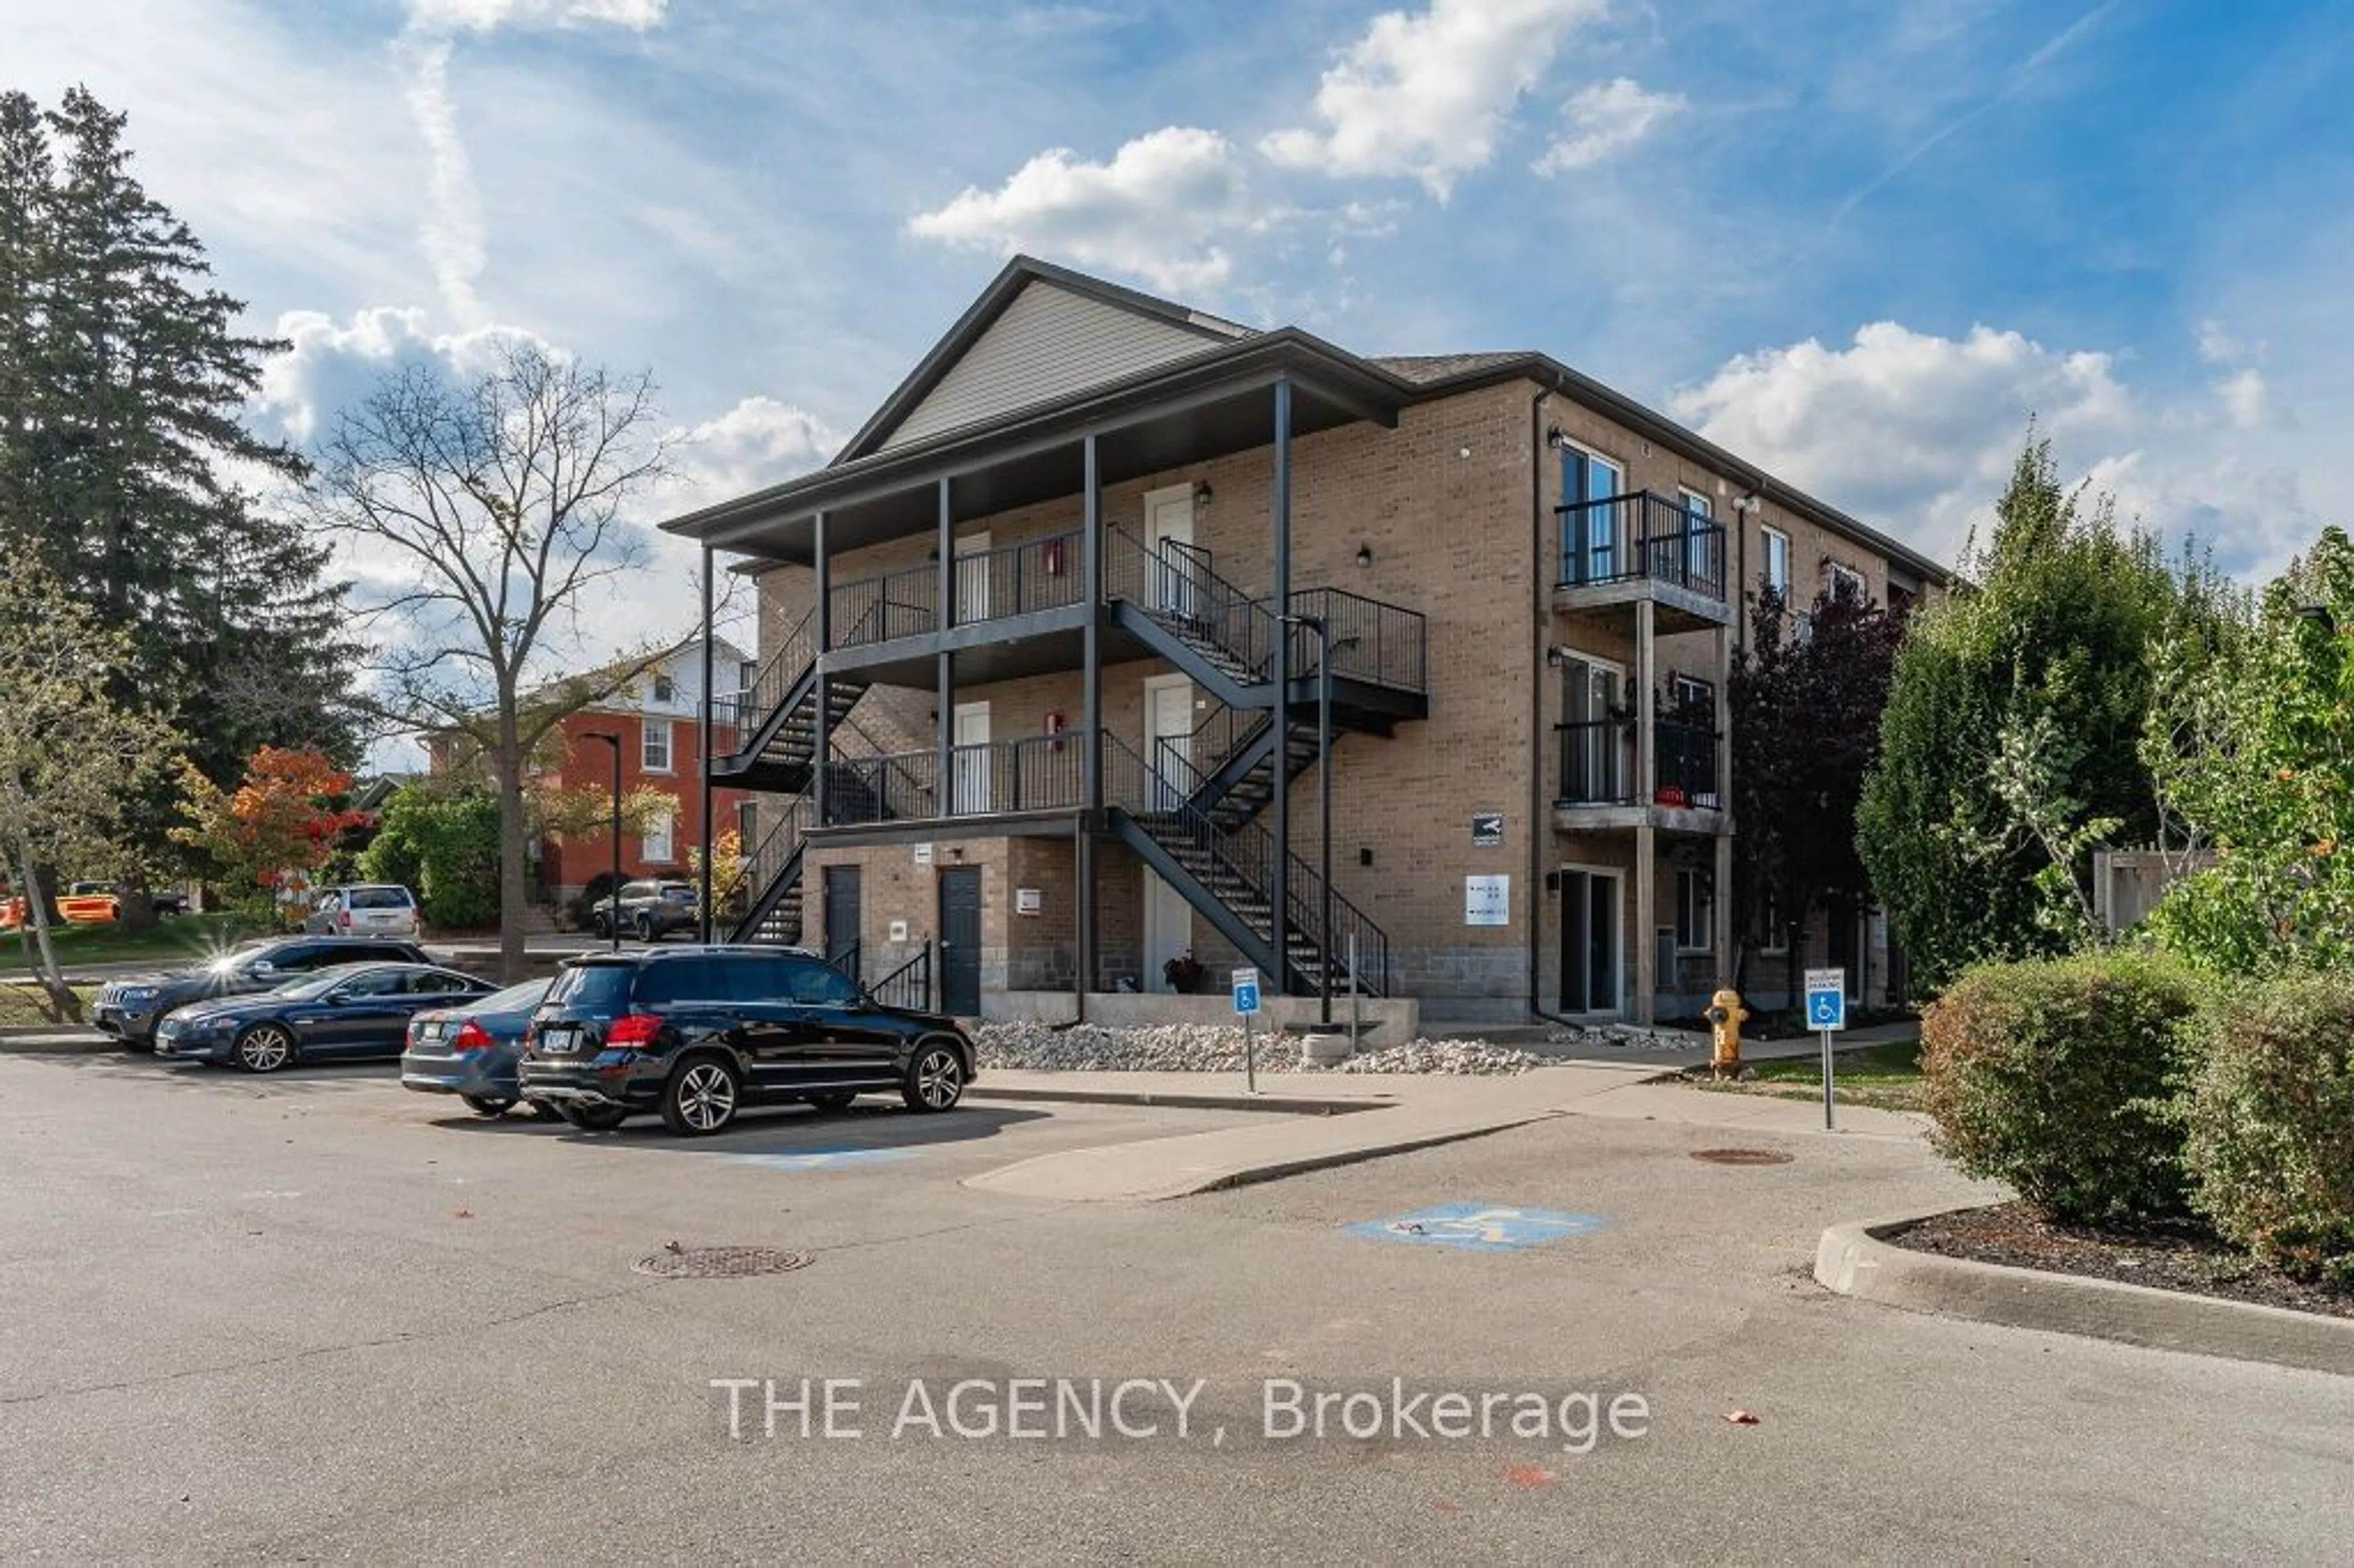 Street view for 185 Windale Cres #6D, Kitchener Ontario N2E 3H4